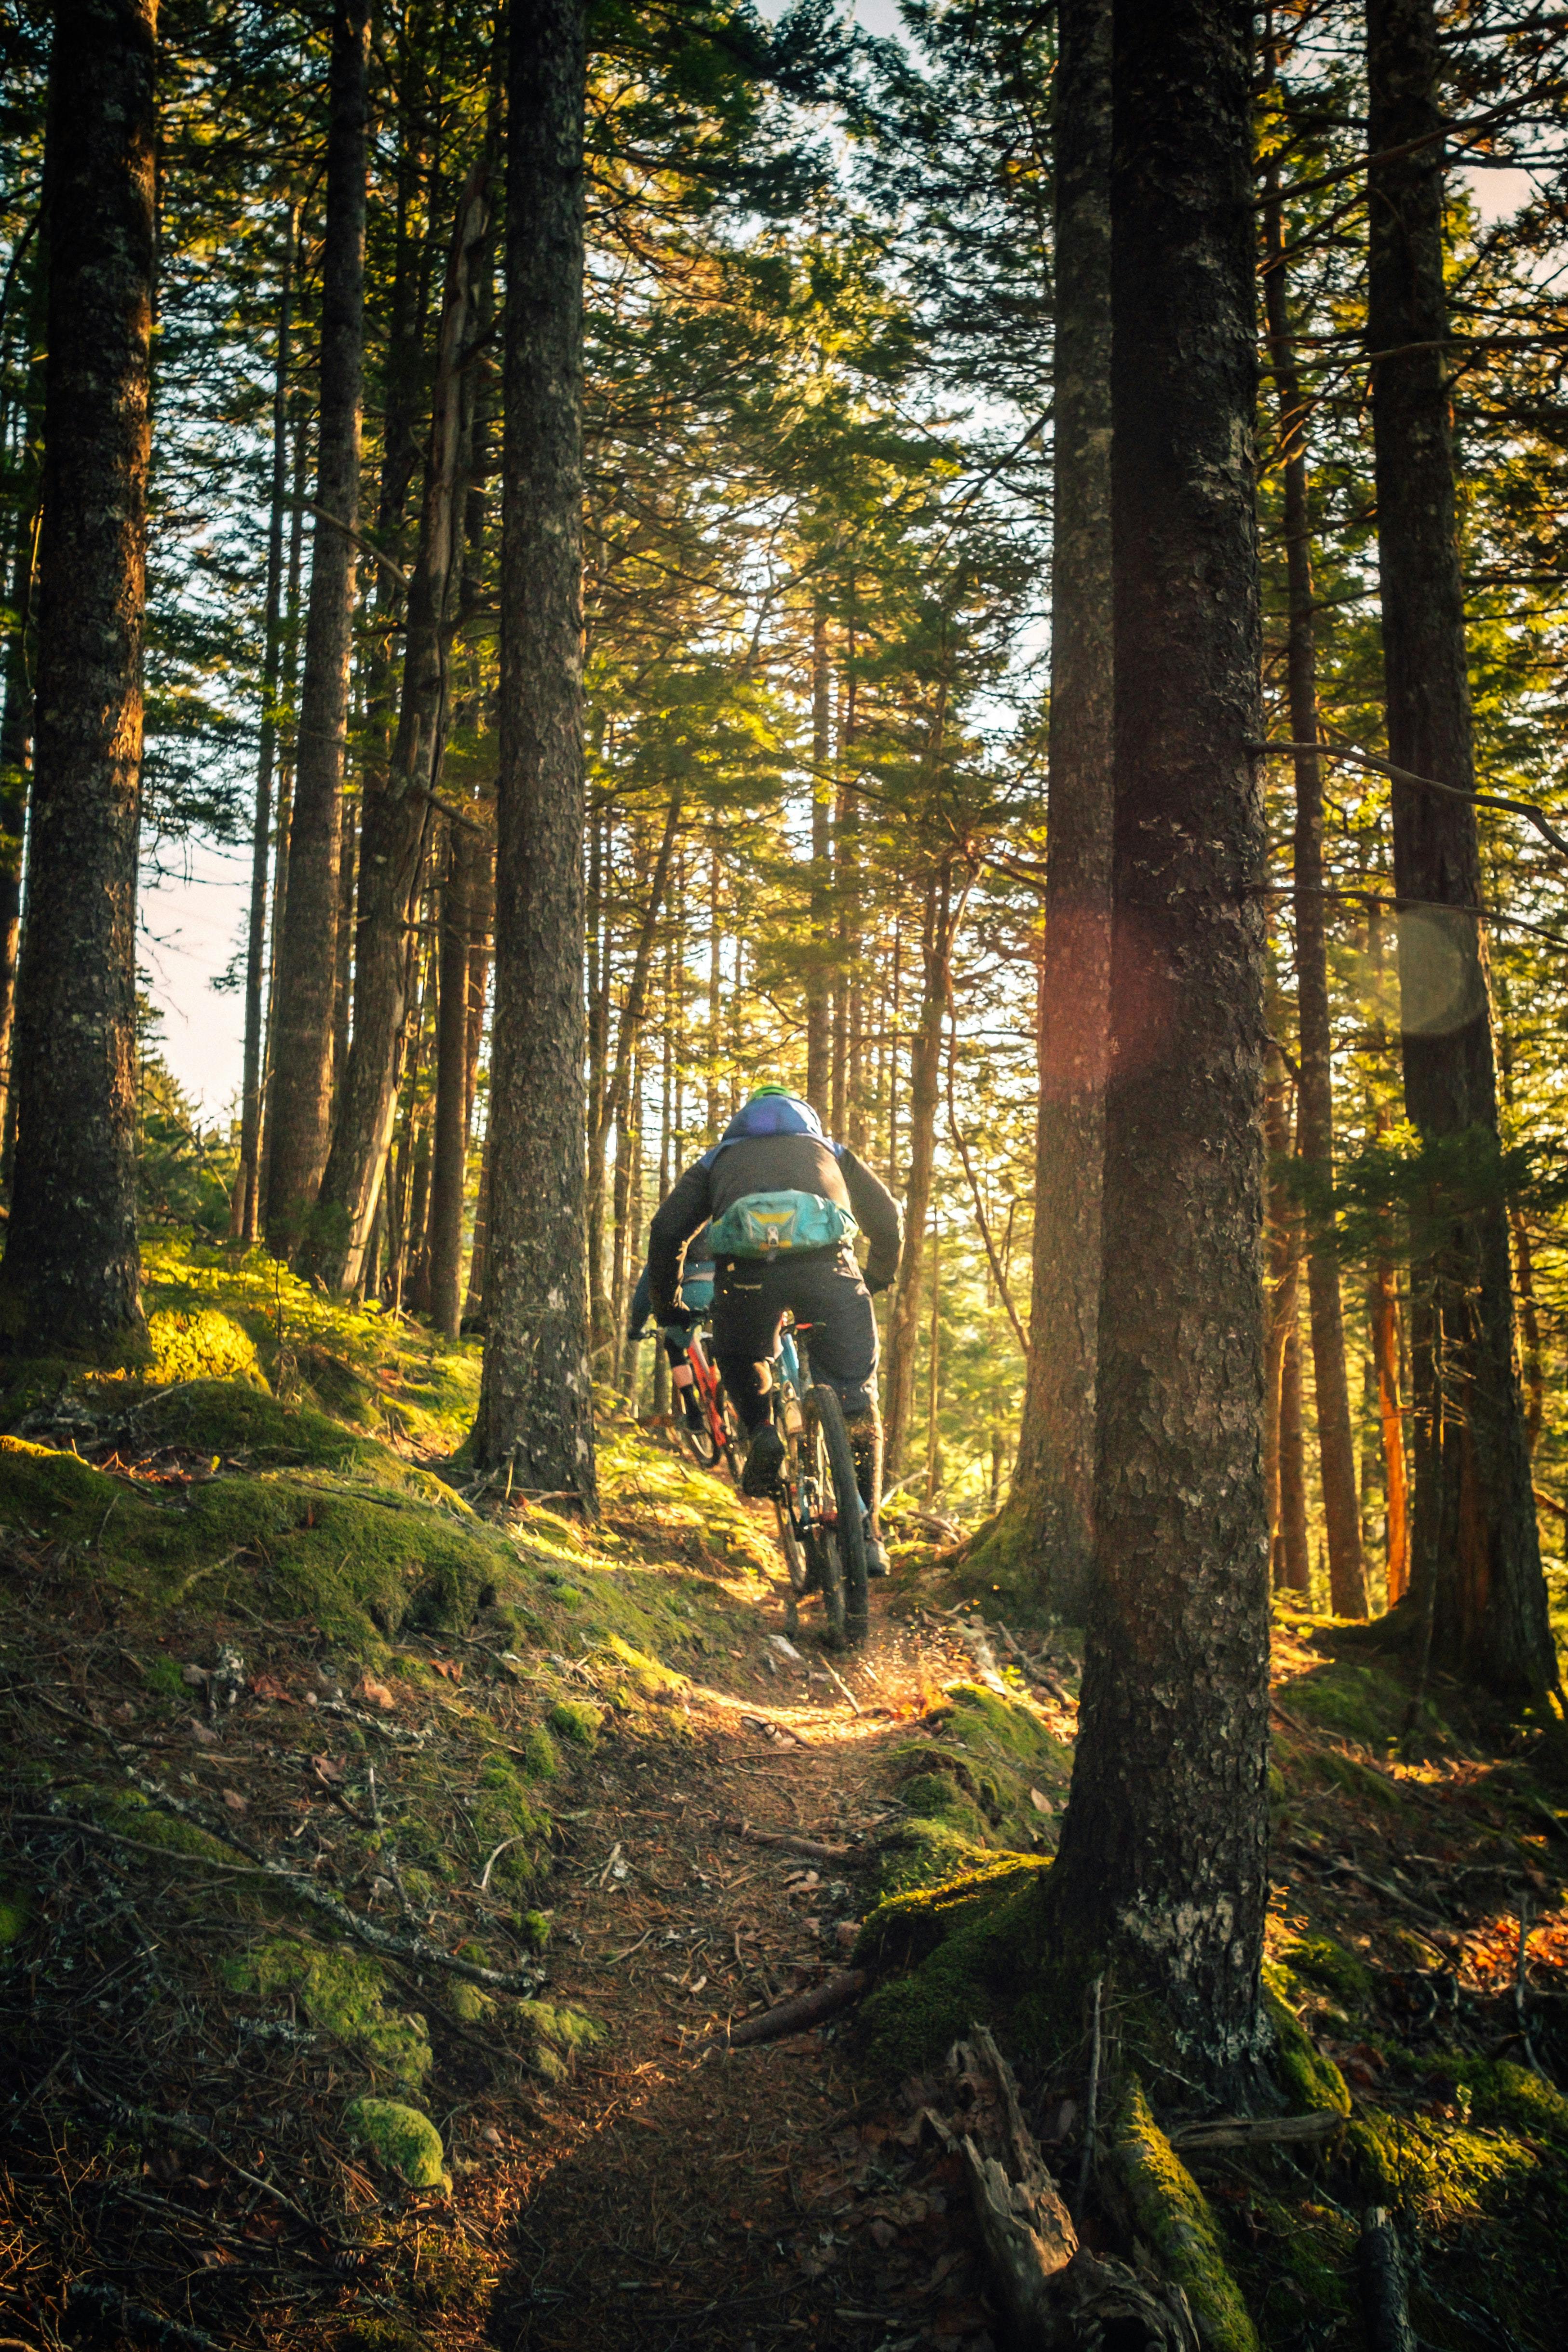 A group of mountain bikers traverse a narrow, tree-lined trail